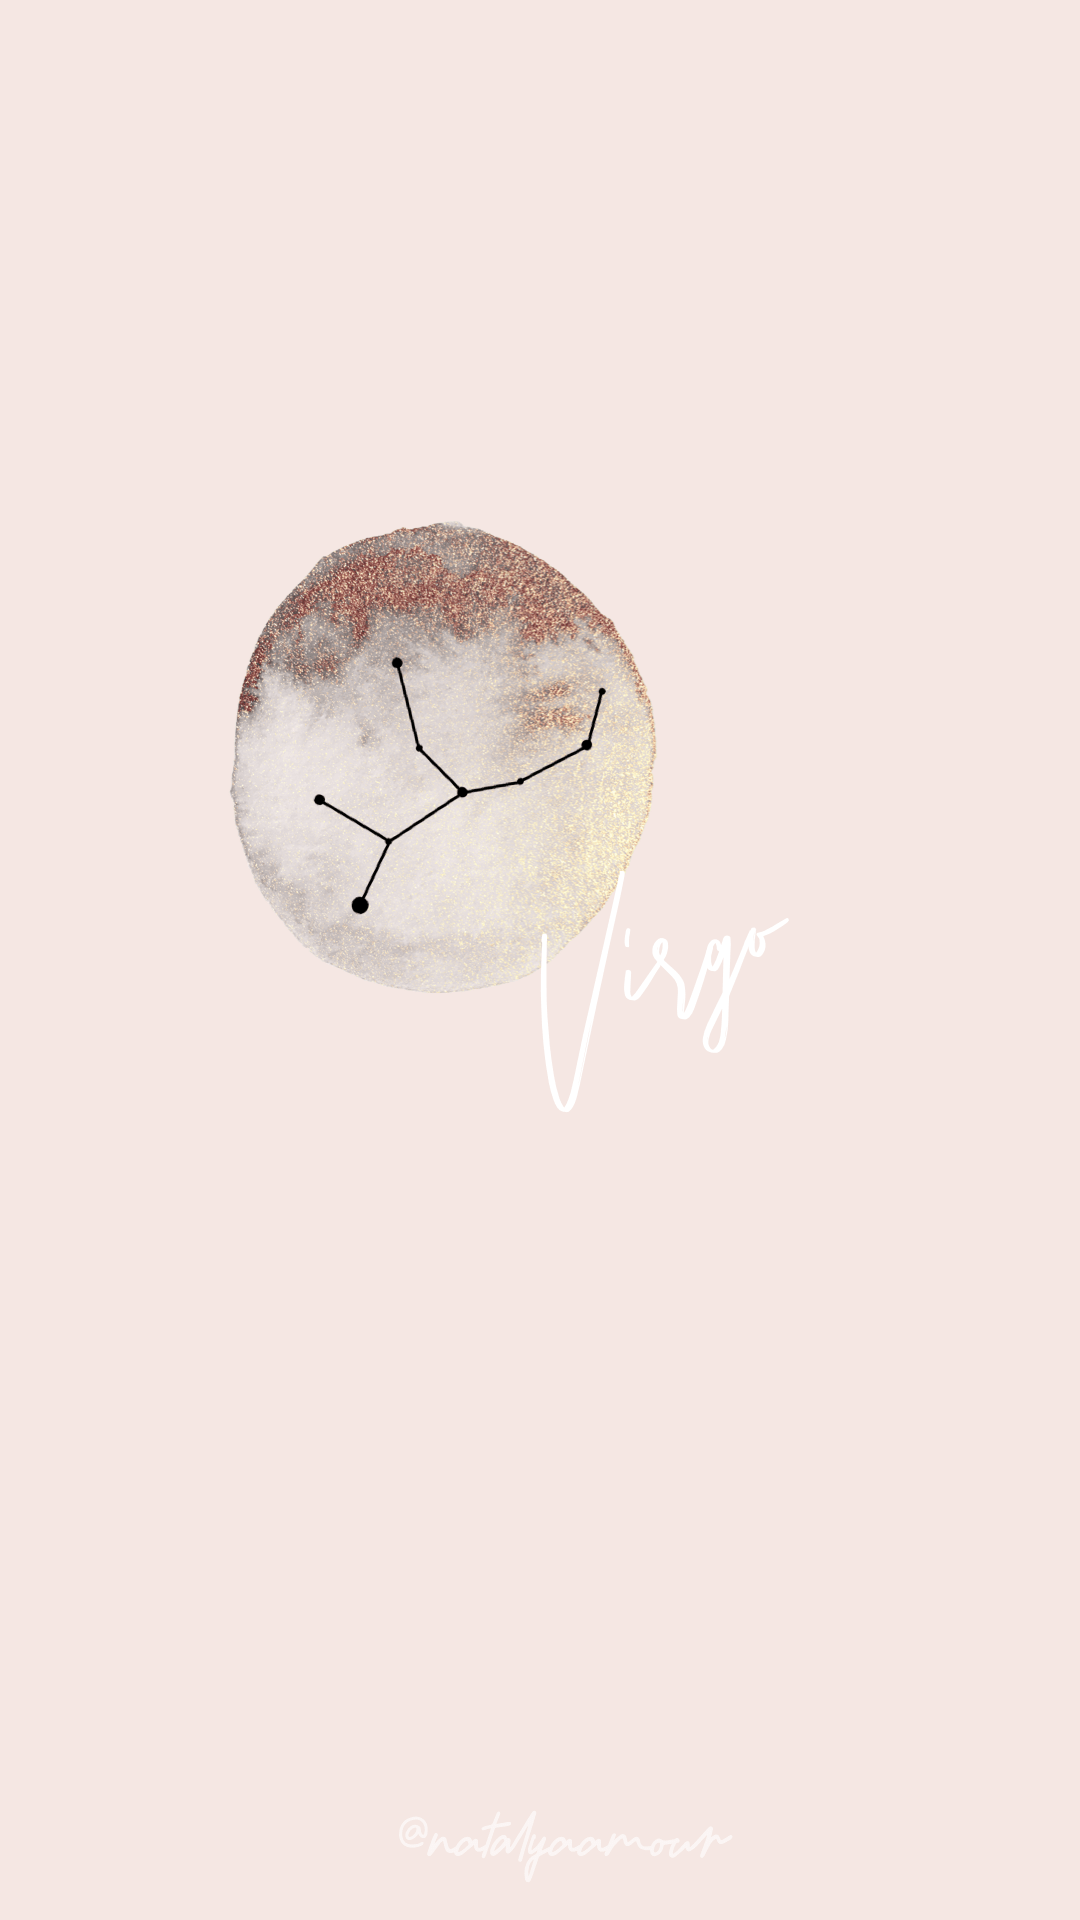 Virgo zodiac sign wallpaper for phone in a watercolor and gold design - Virgo